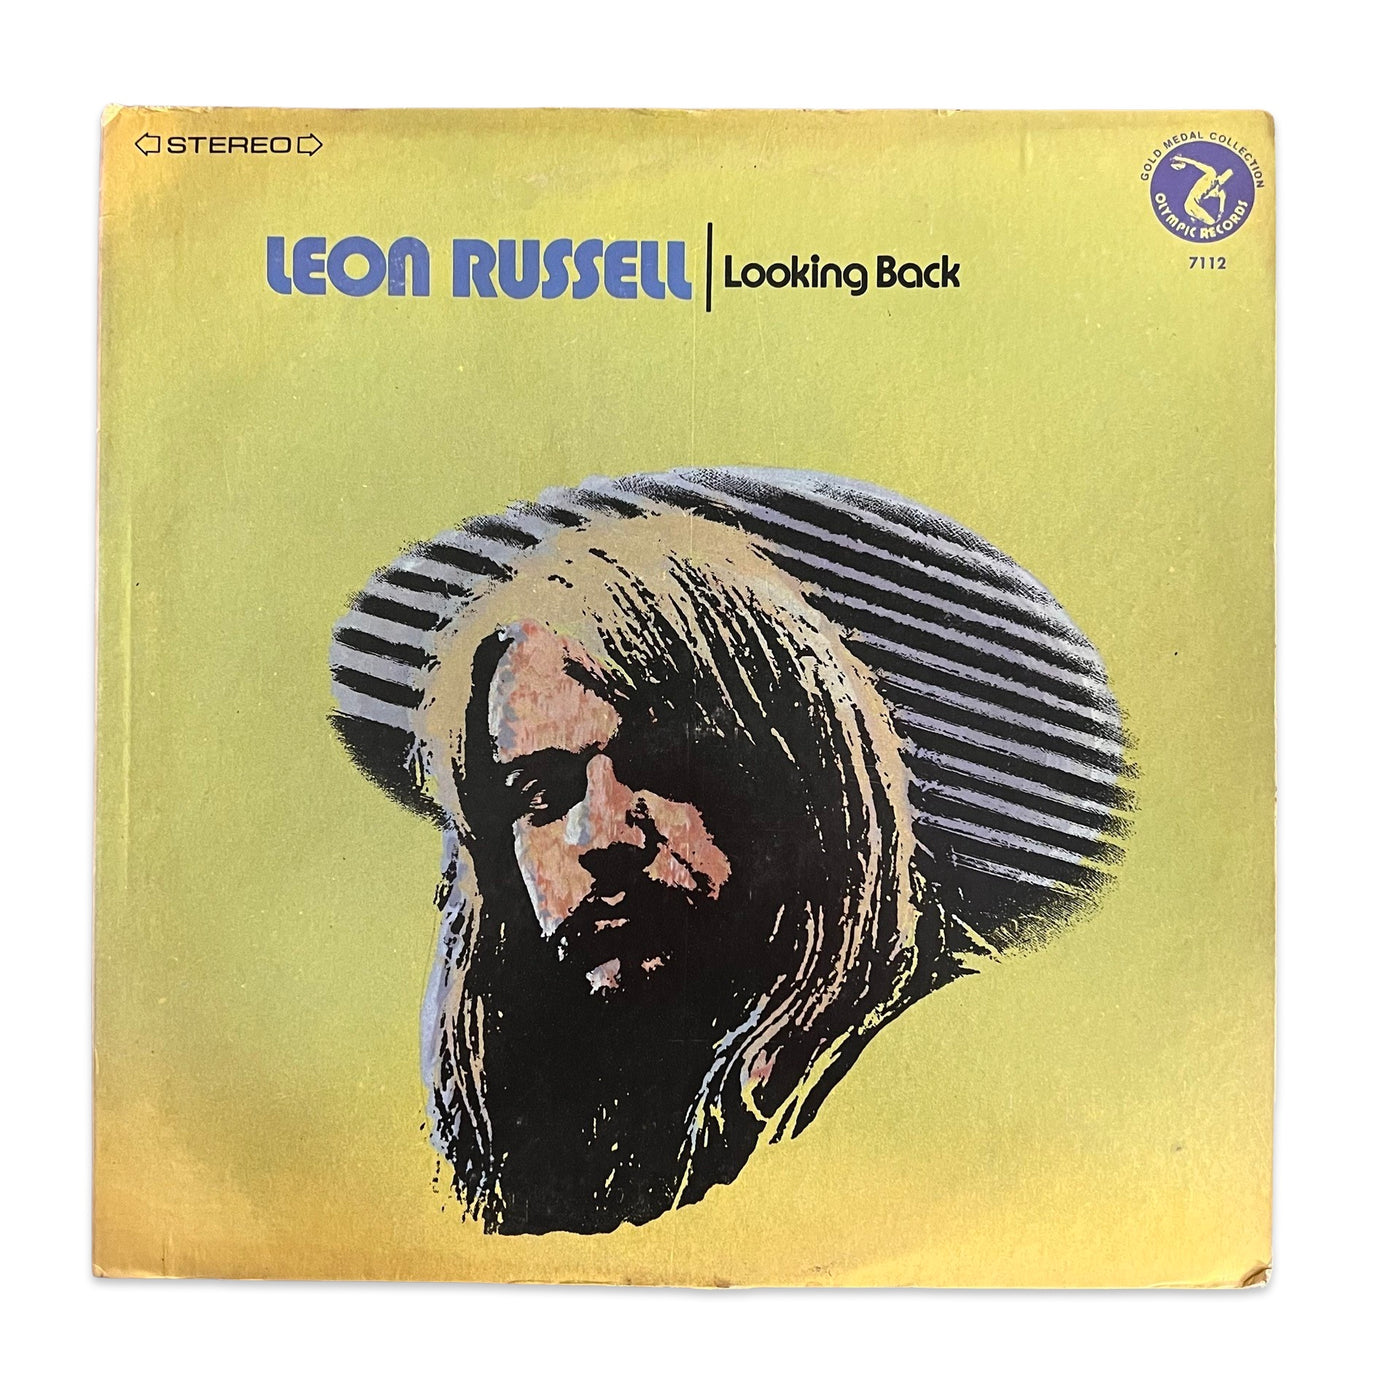 Leon Russell – Looking Back